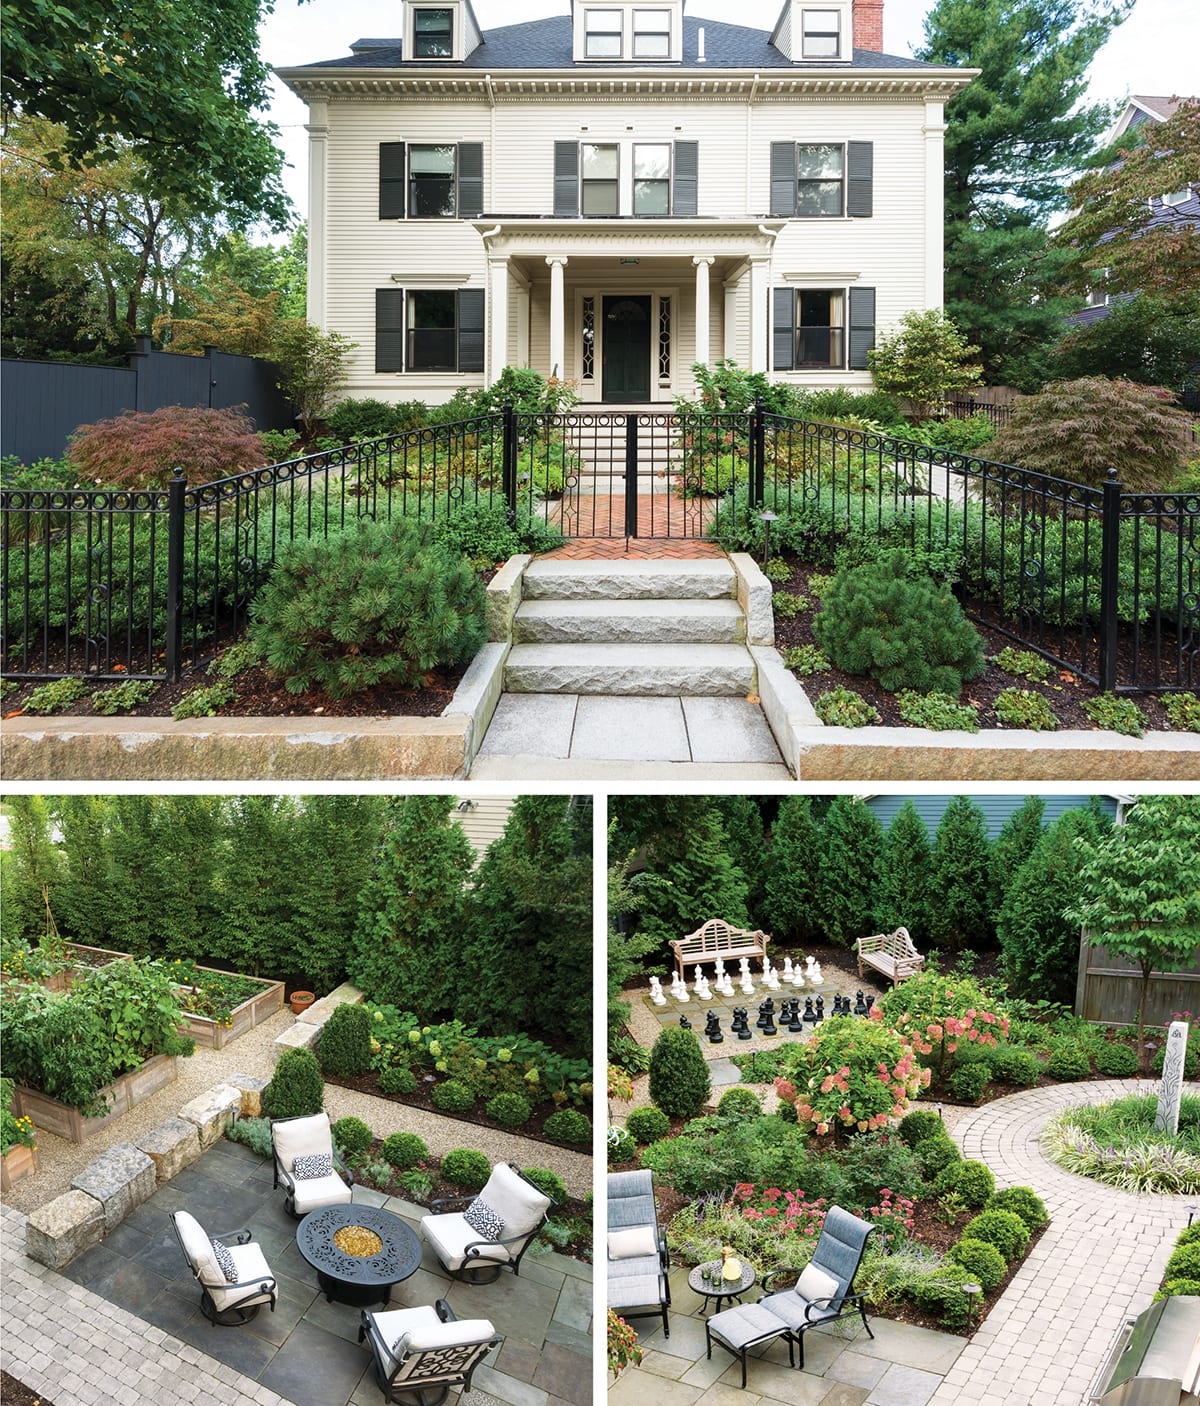 The exterior of a house in Cambridge plus two aerial shots of the backyard featuring a fire pit, lounge chairs and a life-size chess board.